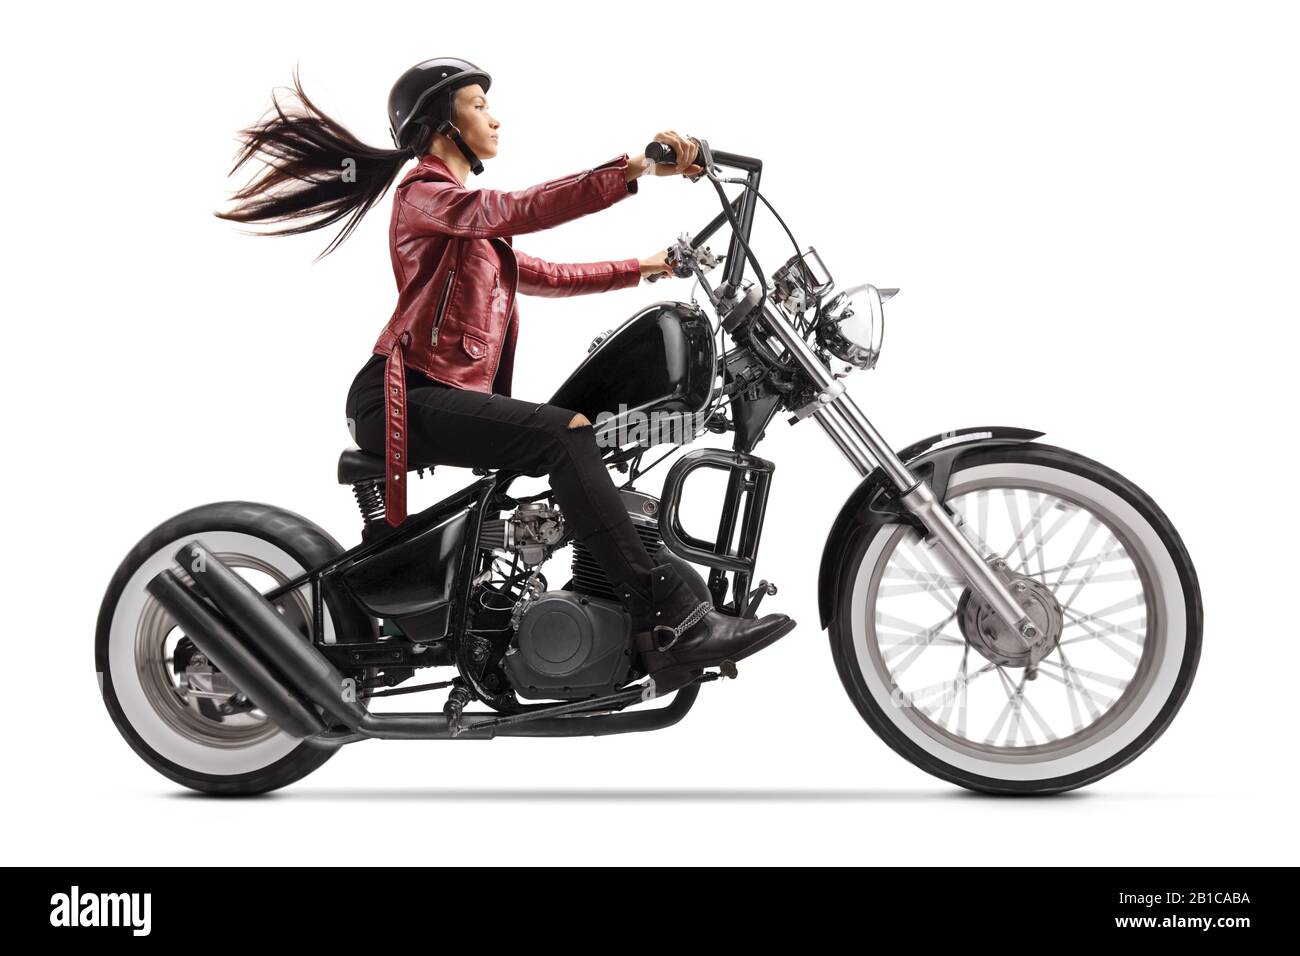 Full length profile shot of a young woman riding a custom black motorcycle isolated on white background Stock Photo